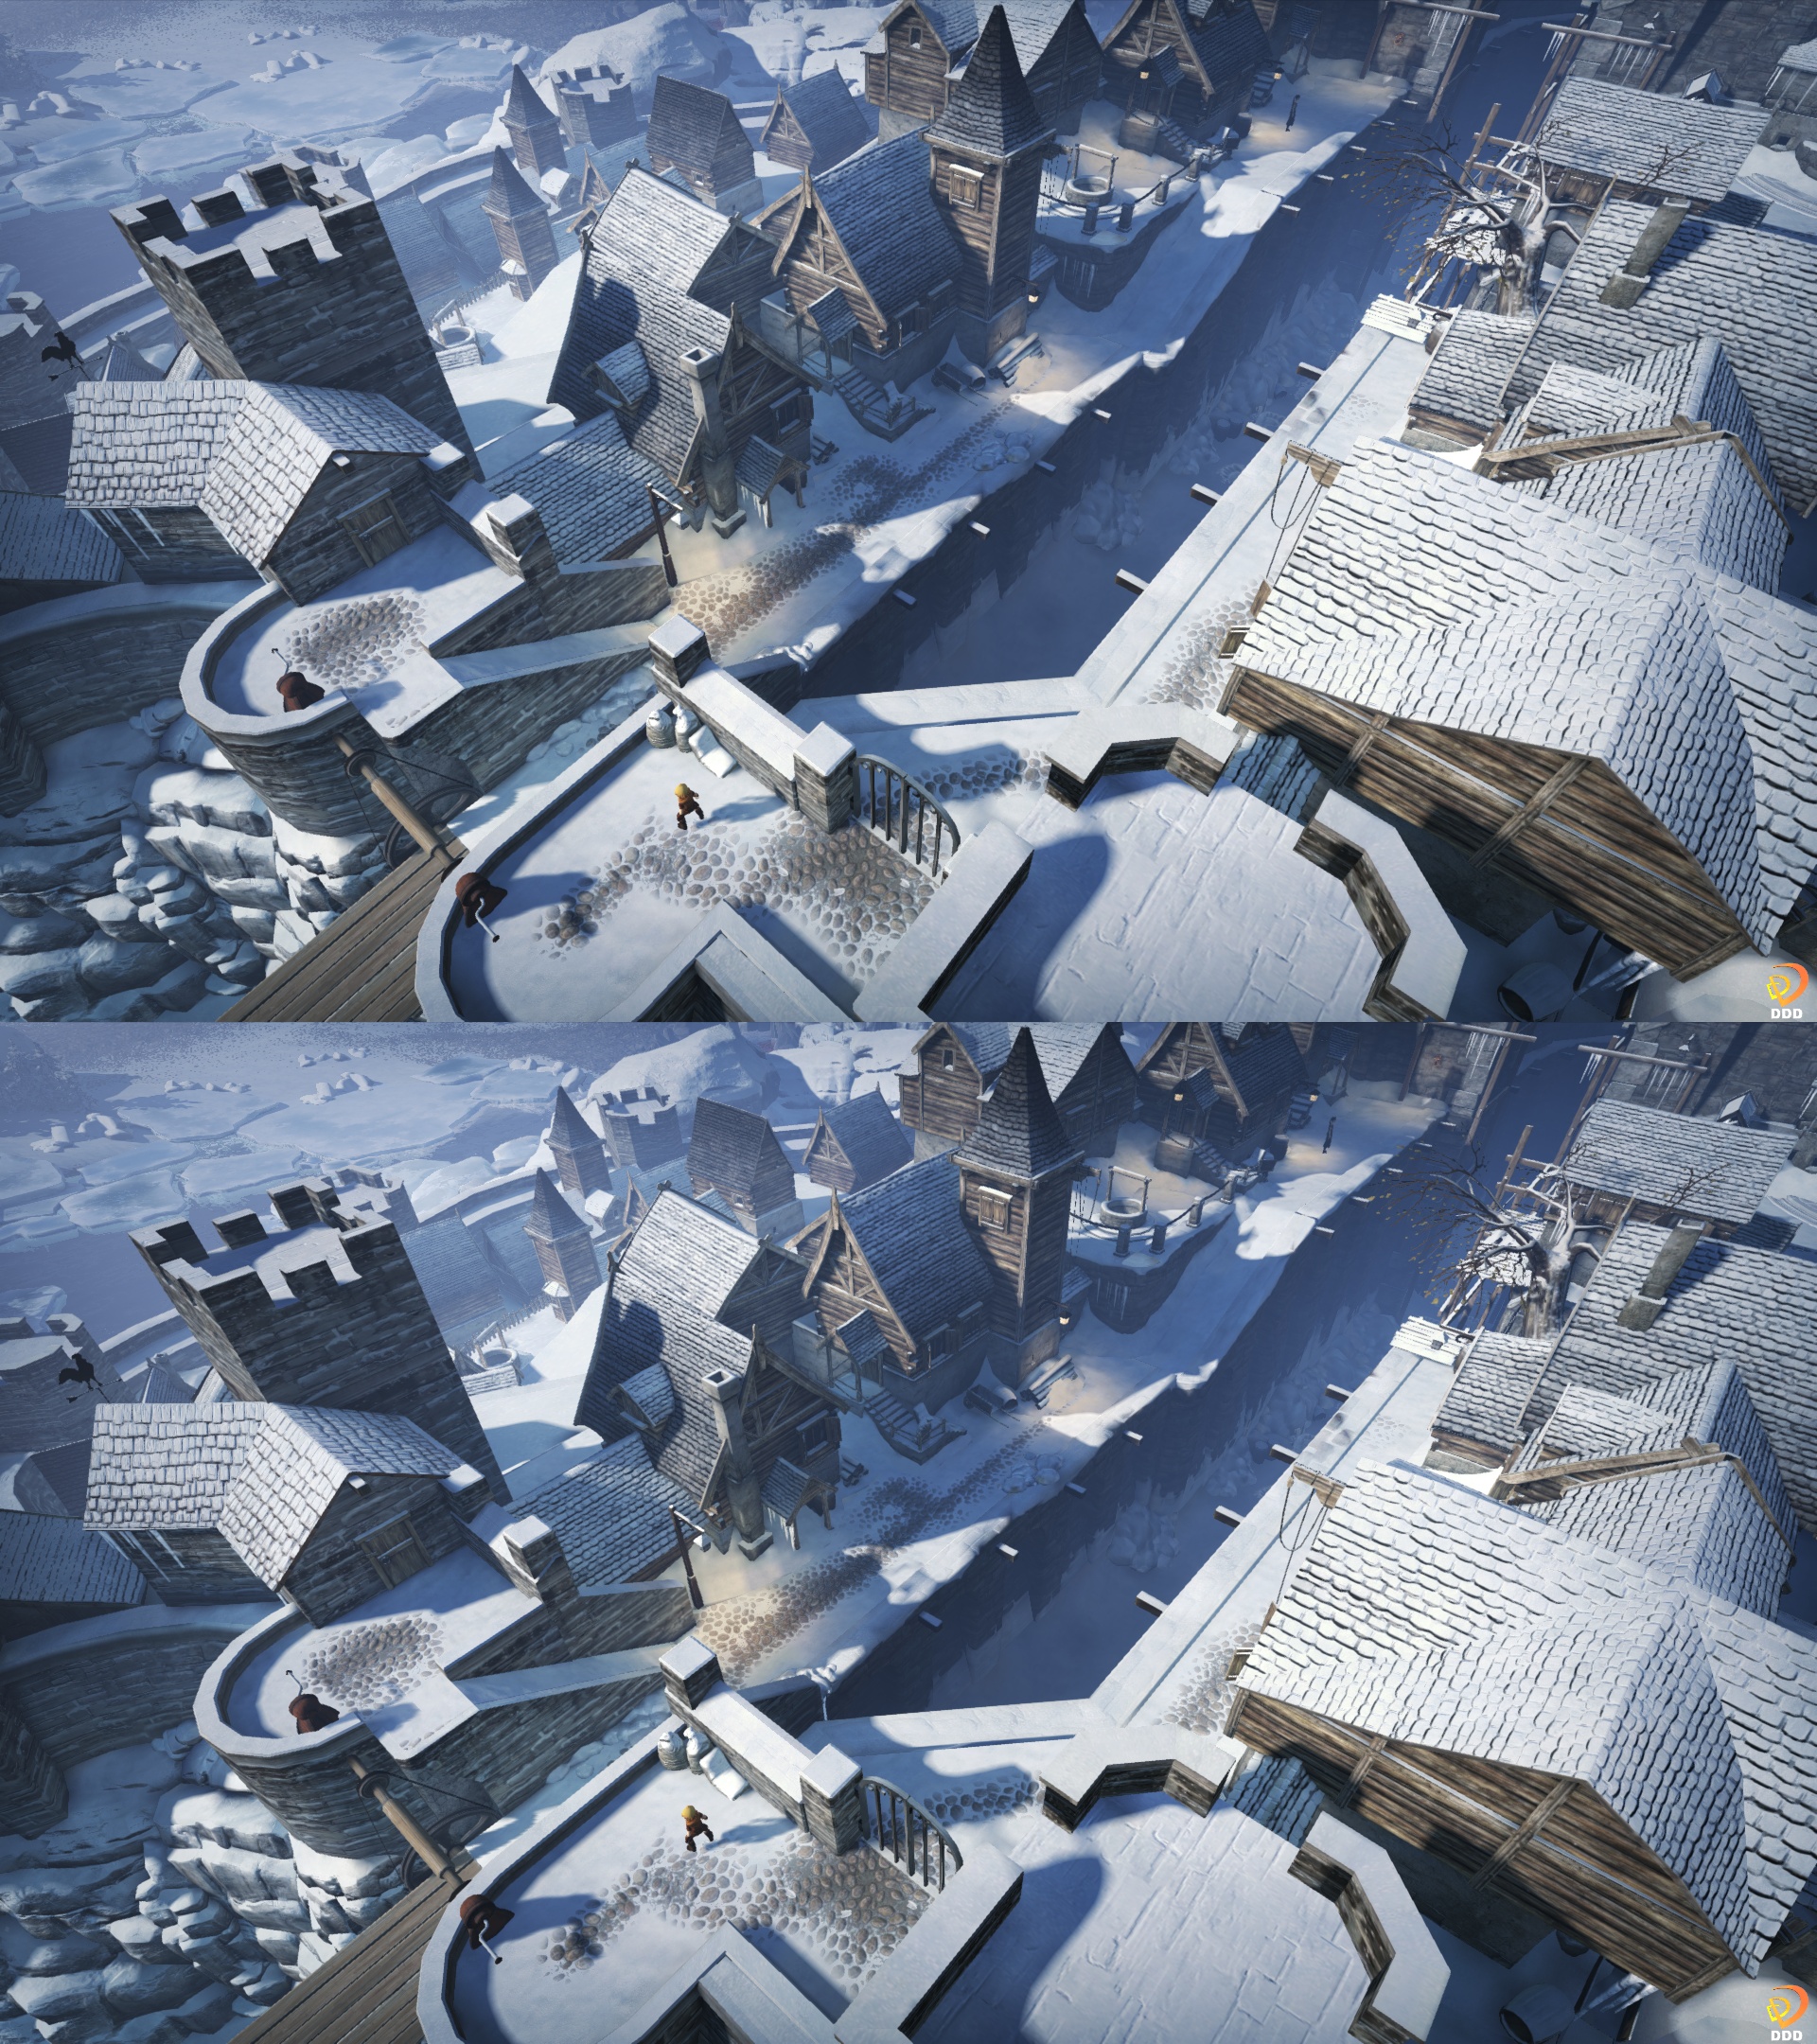 Brothers - A Tale of Two Sons 3D - Frozen Village by rocketman5004